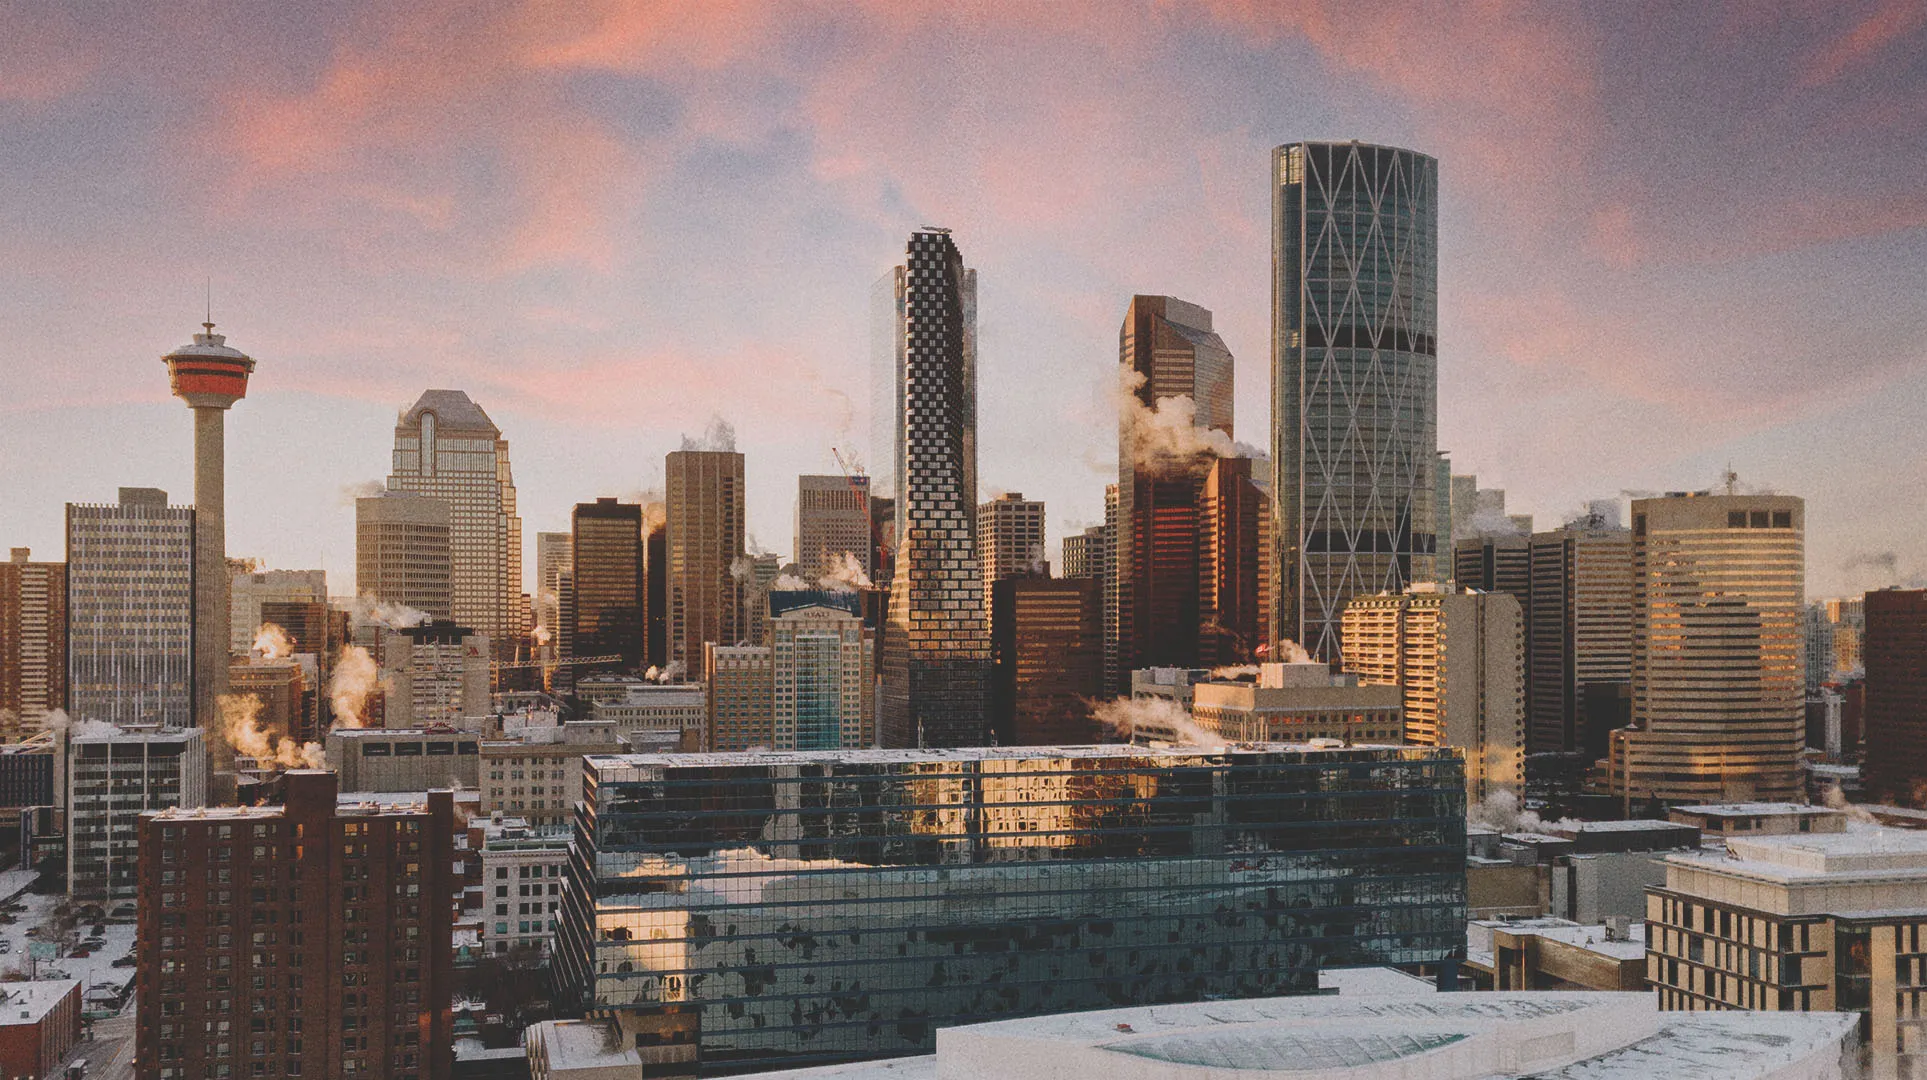 downtown Calgary skyline during winter with a beautiful pink sky